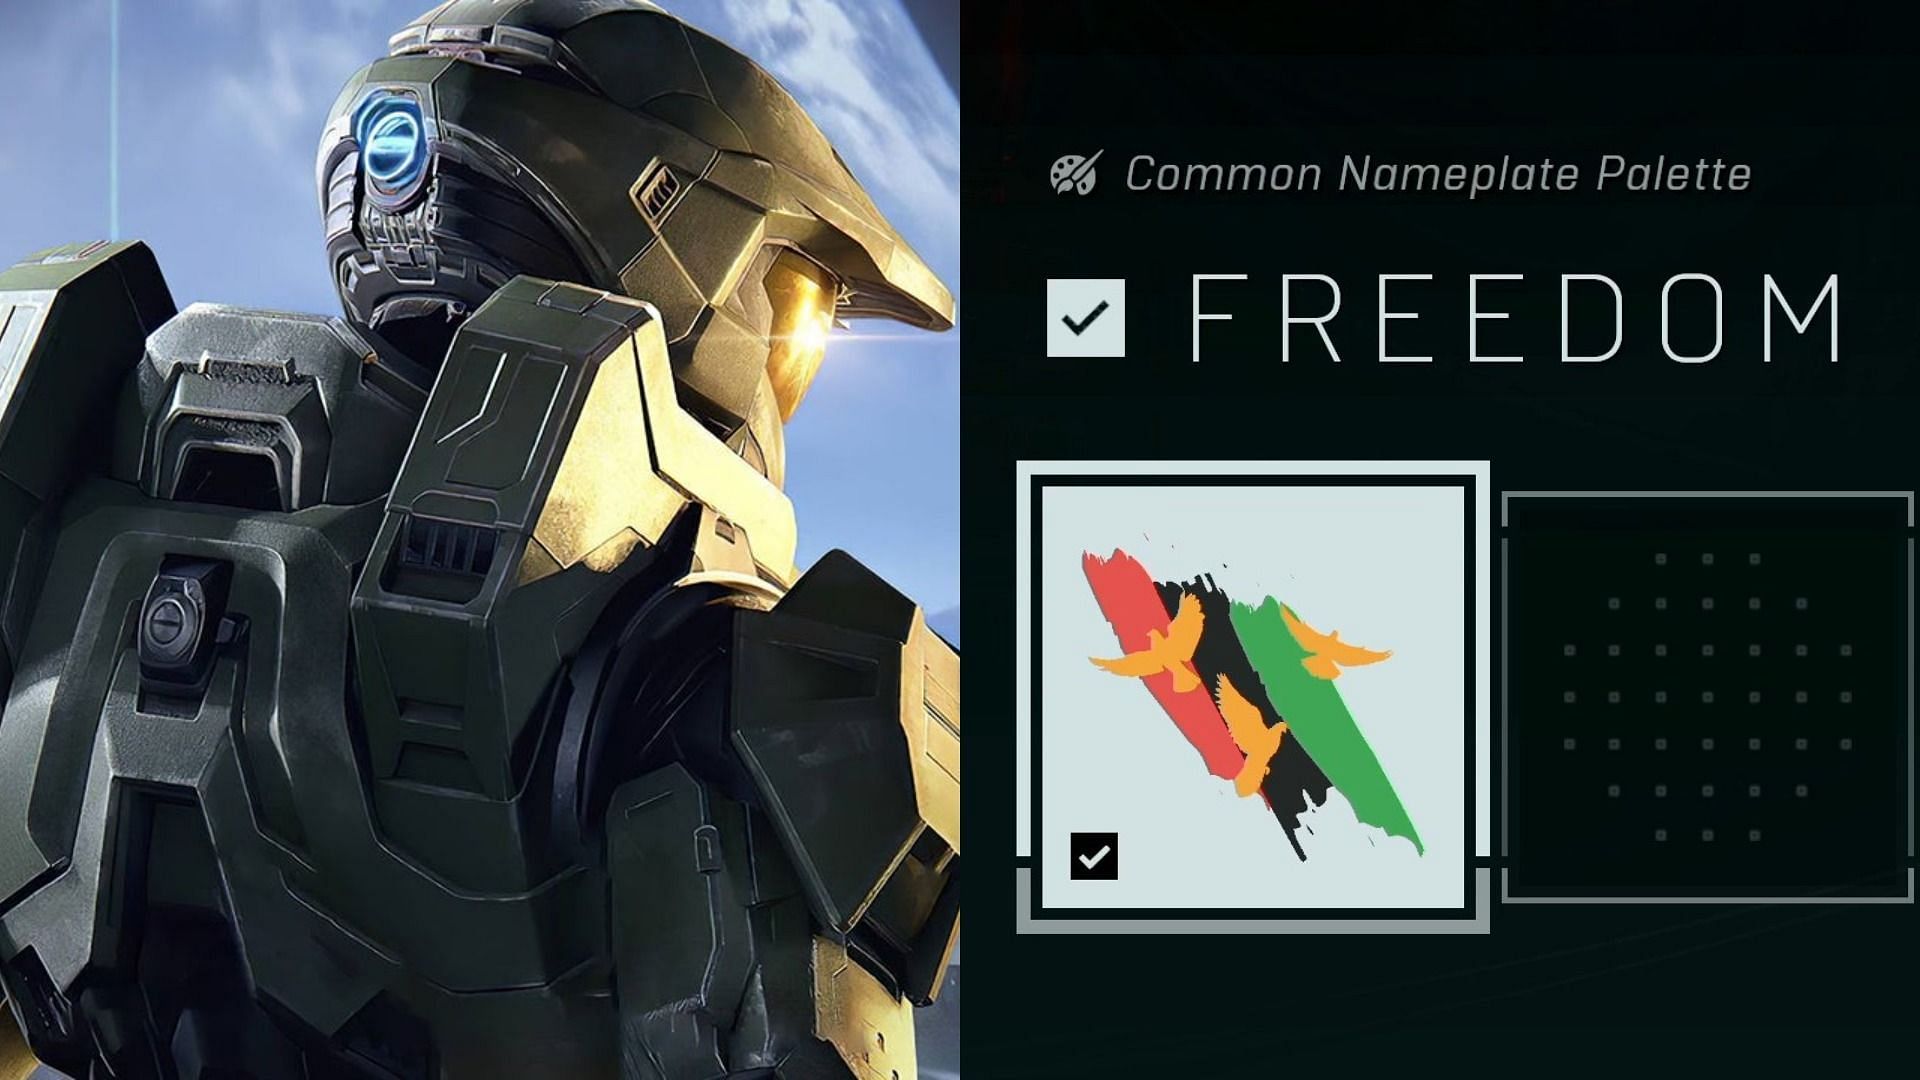 Halo Infinite&#039;s 343 Industries quickly walked back an insensitive announcement for Juneteenth (Image via 343 Industries)